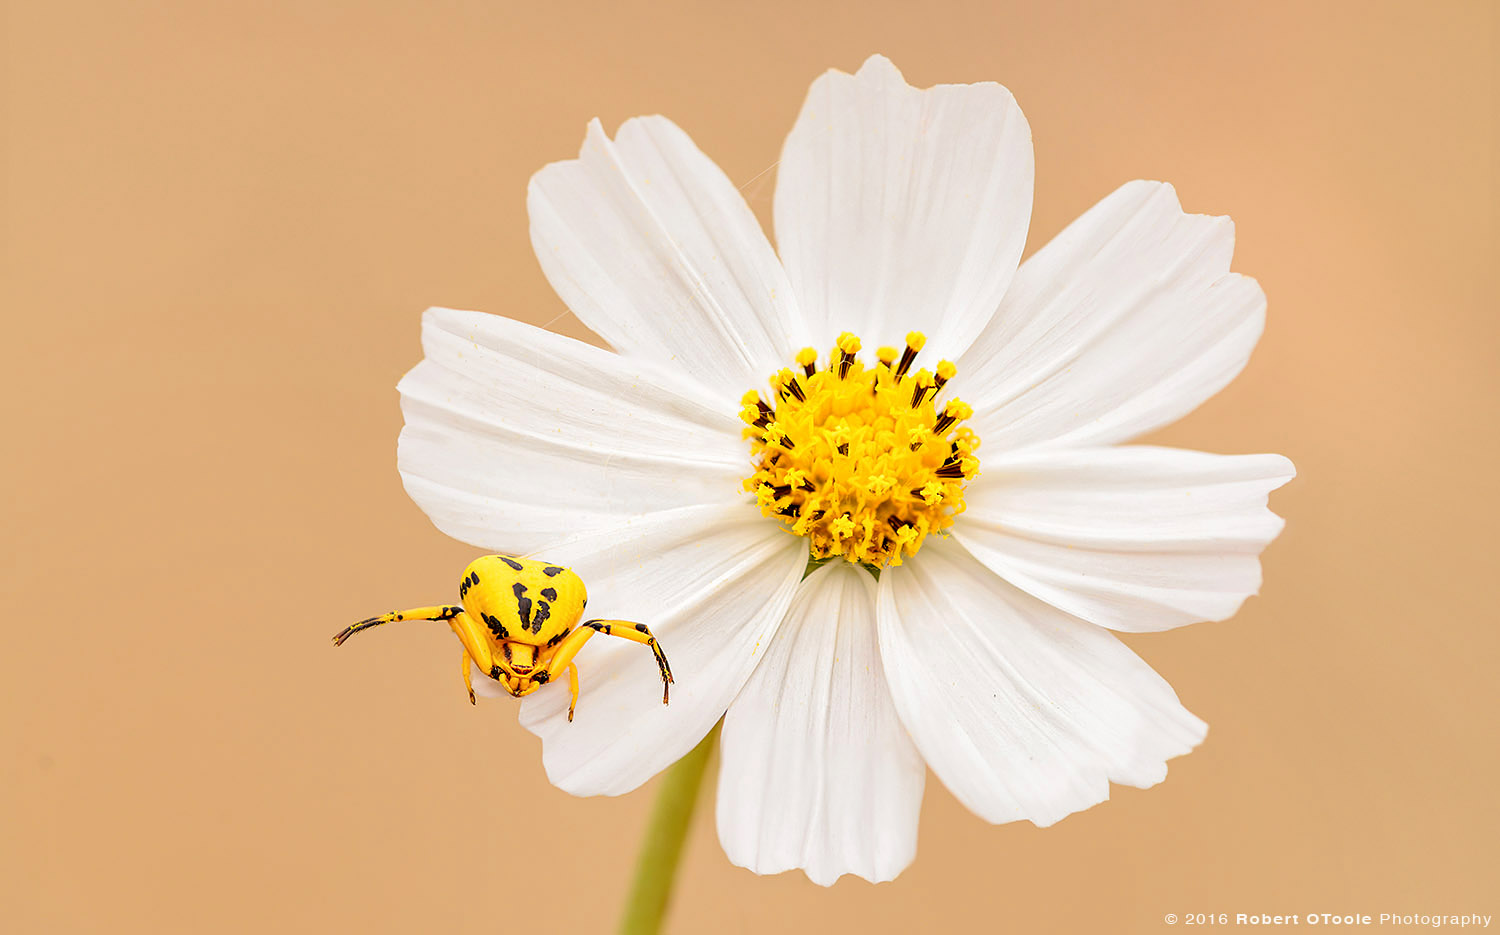 Yellow Crab Spider on White Cosmos Flower 